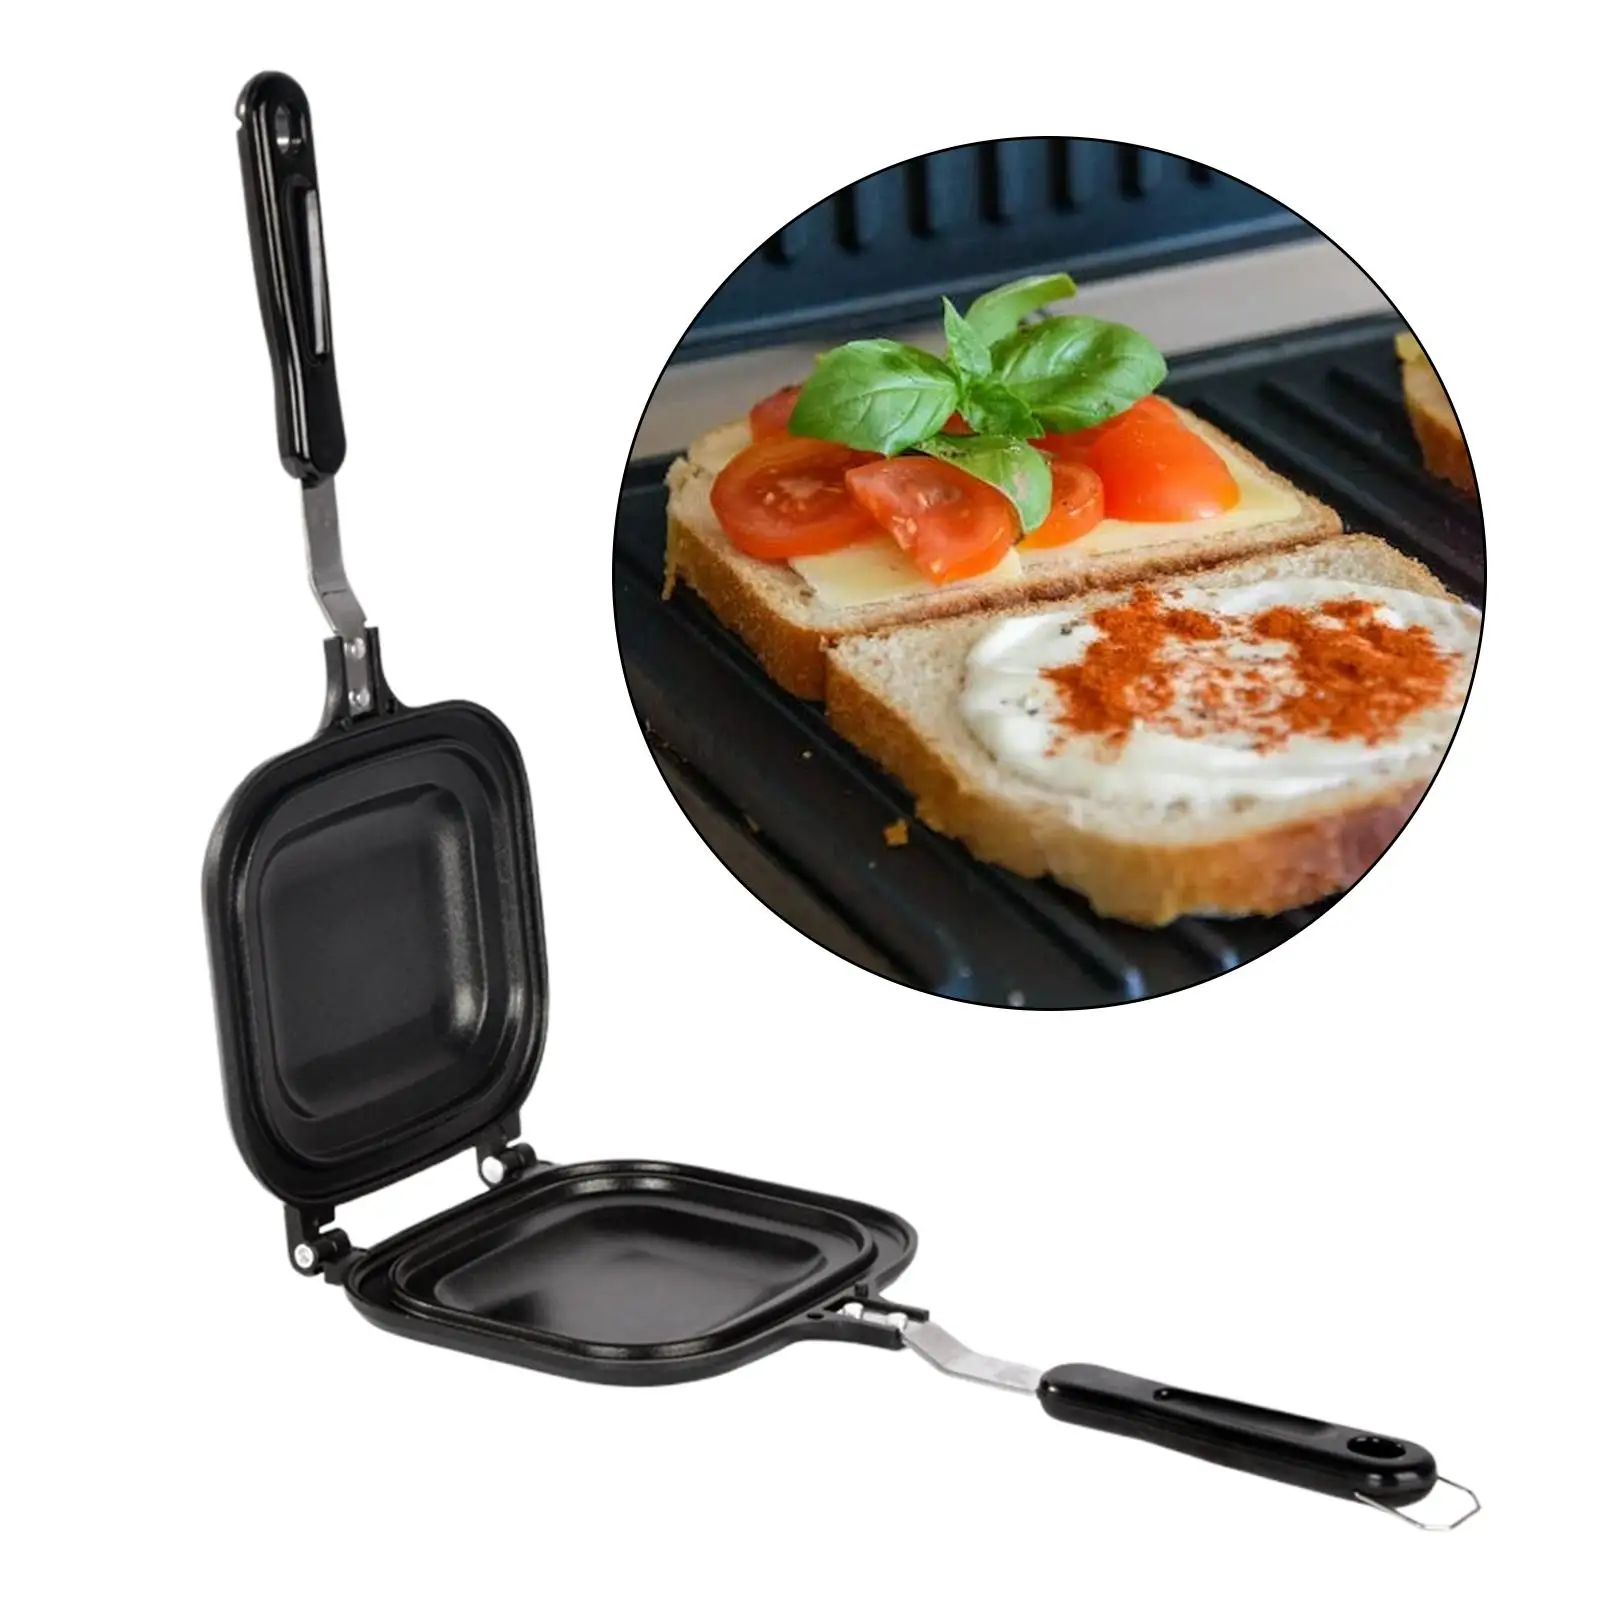 Bread Toast Maker with Heat Resistant Handles Double Sided Sandwiches Maker for Stove Top